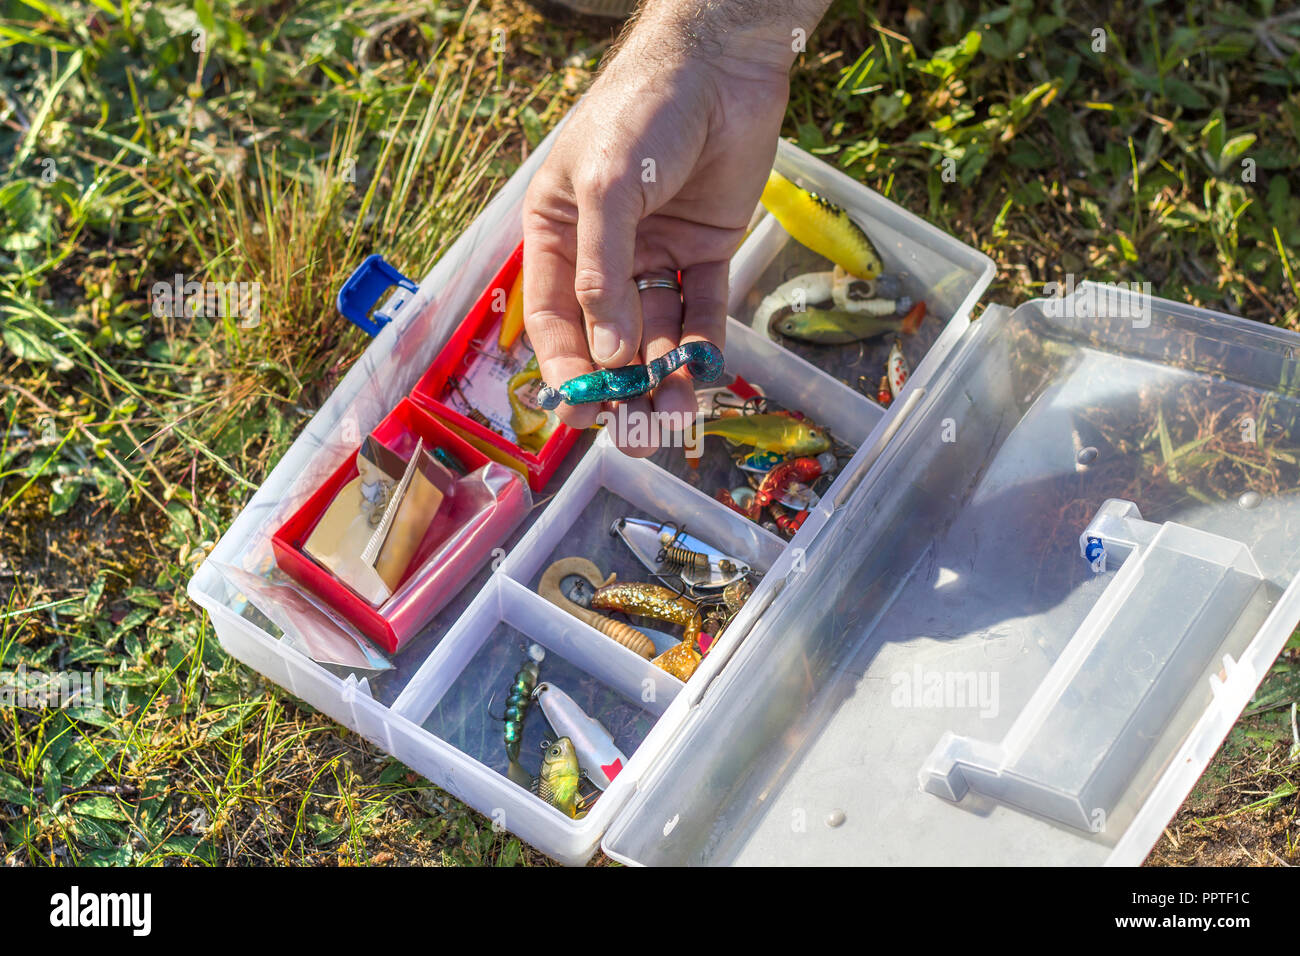 An angler's rod chooses a spinning bait from the box. The fisherman chooses a rubber bait from the box. Stock Photo